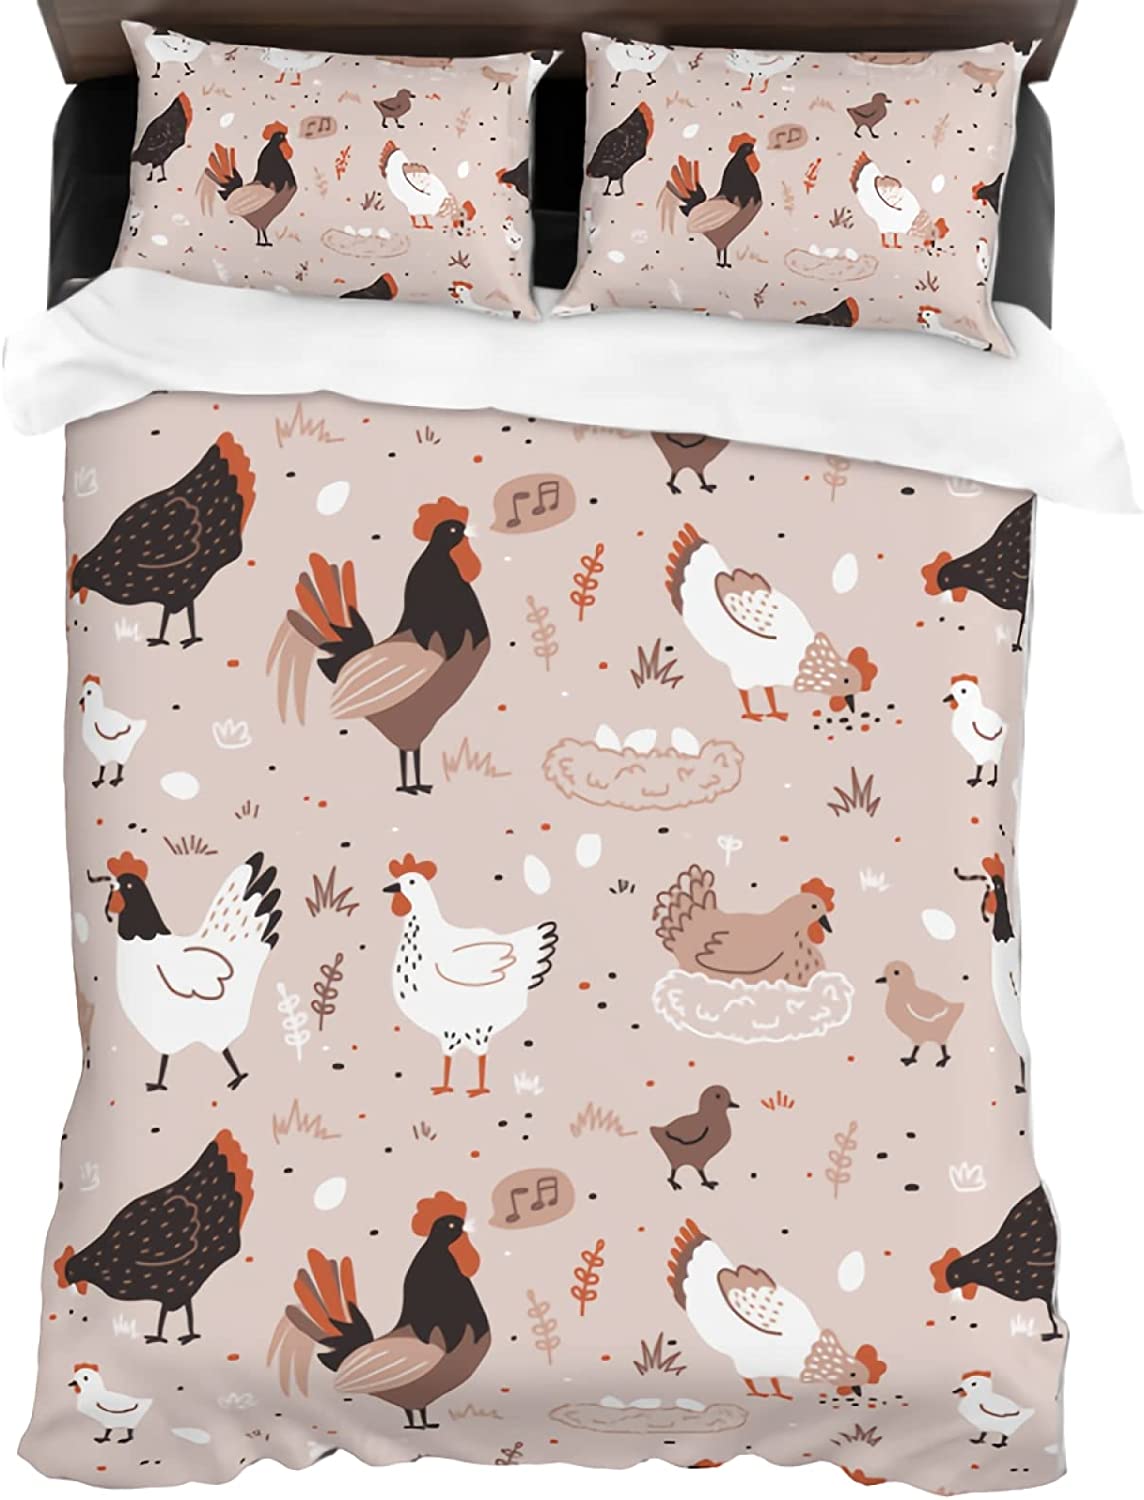 Chicken Rooster Quilt Blanket Bed Sets Pillowcases Cover